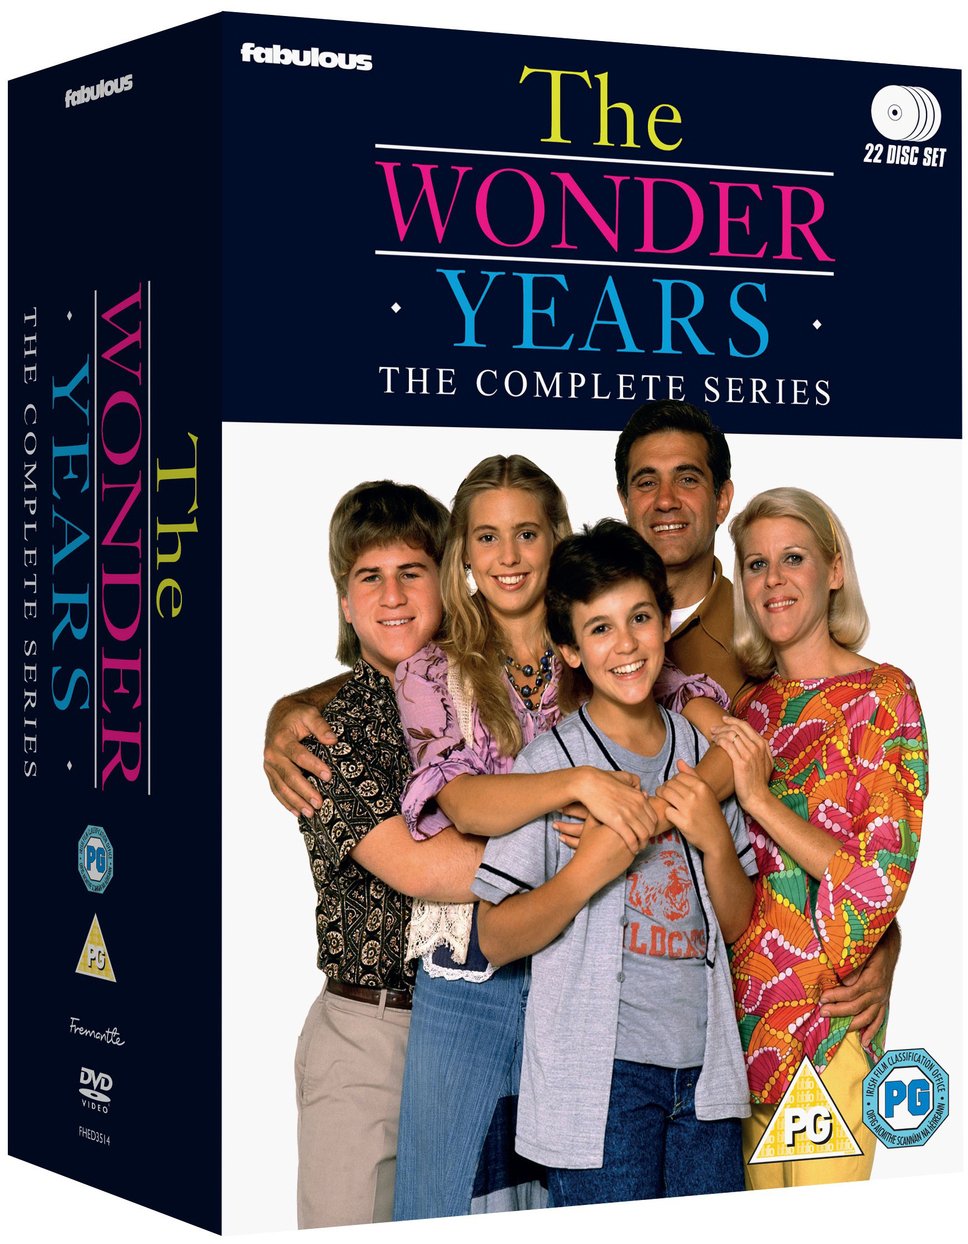 The Wonder Years Complete Series DVD Box Set Review